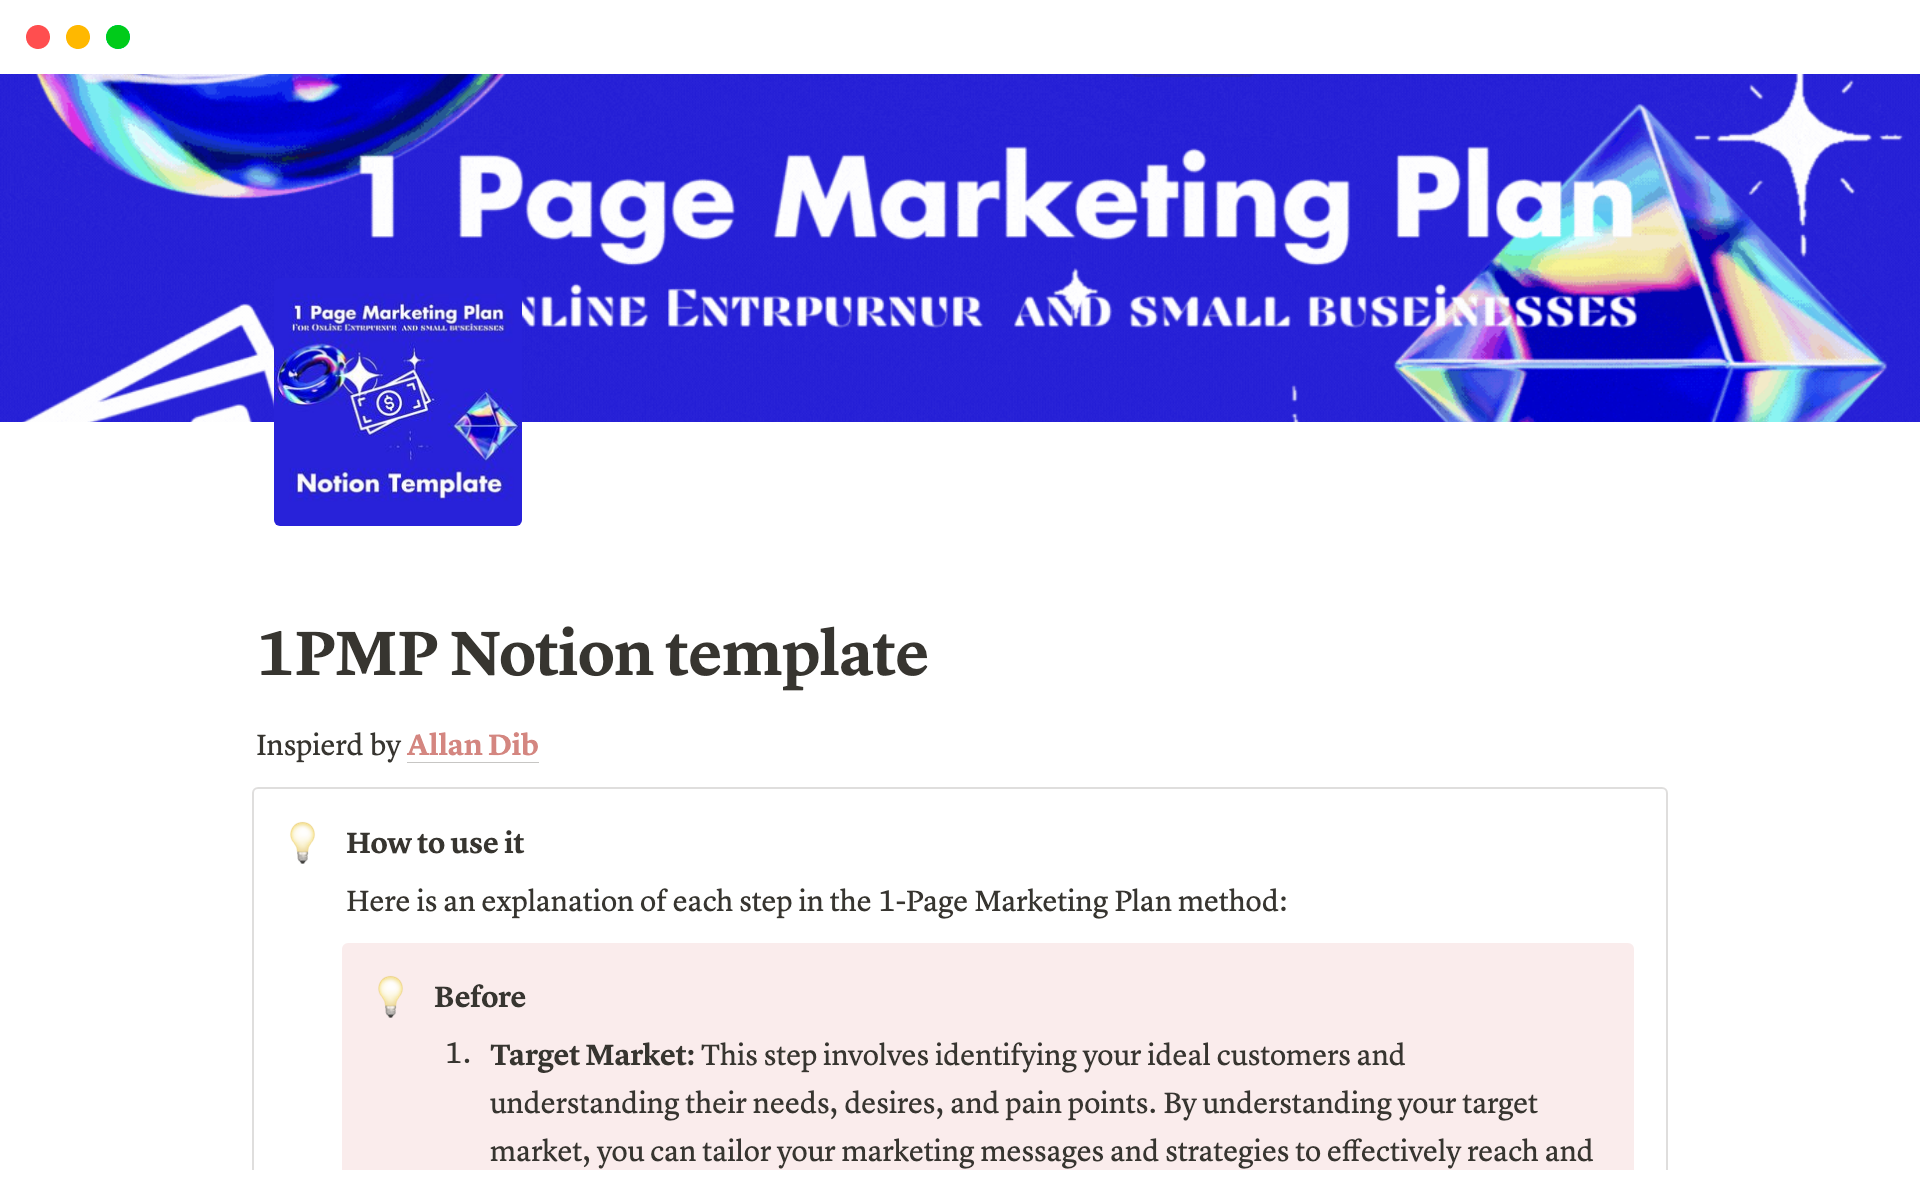 Mallin esikatselu nimelle MarketBoost: The Ultimate 1-Page Marketing Plan Notion Template for Small Online Businesses